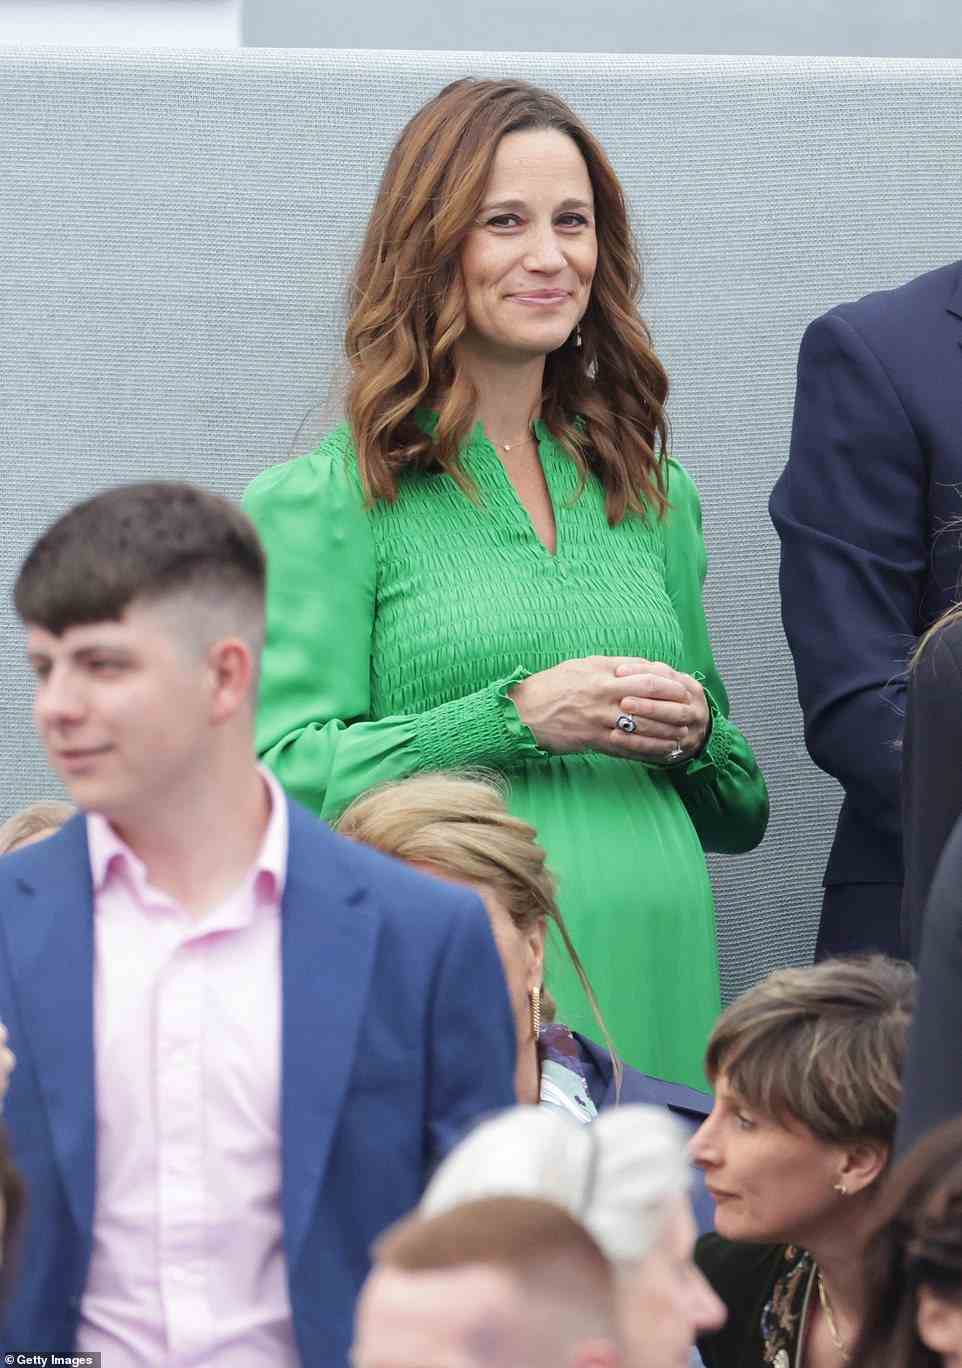 Pippa Middleton looked radiant in a green dress as she joined her parents Carole and Michael Middleton at the Platinum Party on Saturday night. The Duchess of Cambridge's sister stepped out in a lime green frock with ruched detailing across the chest for the star-studded night out at Buckingham Palace